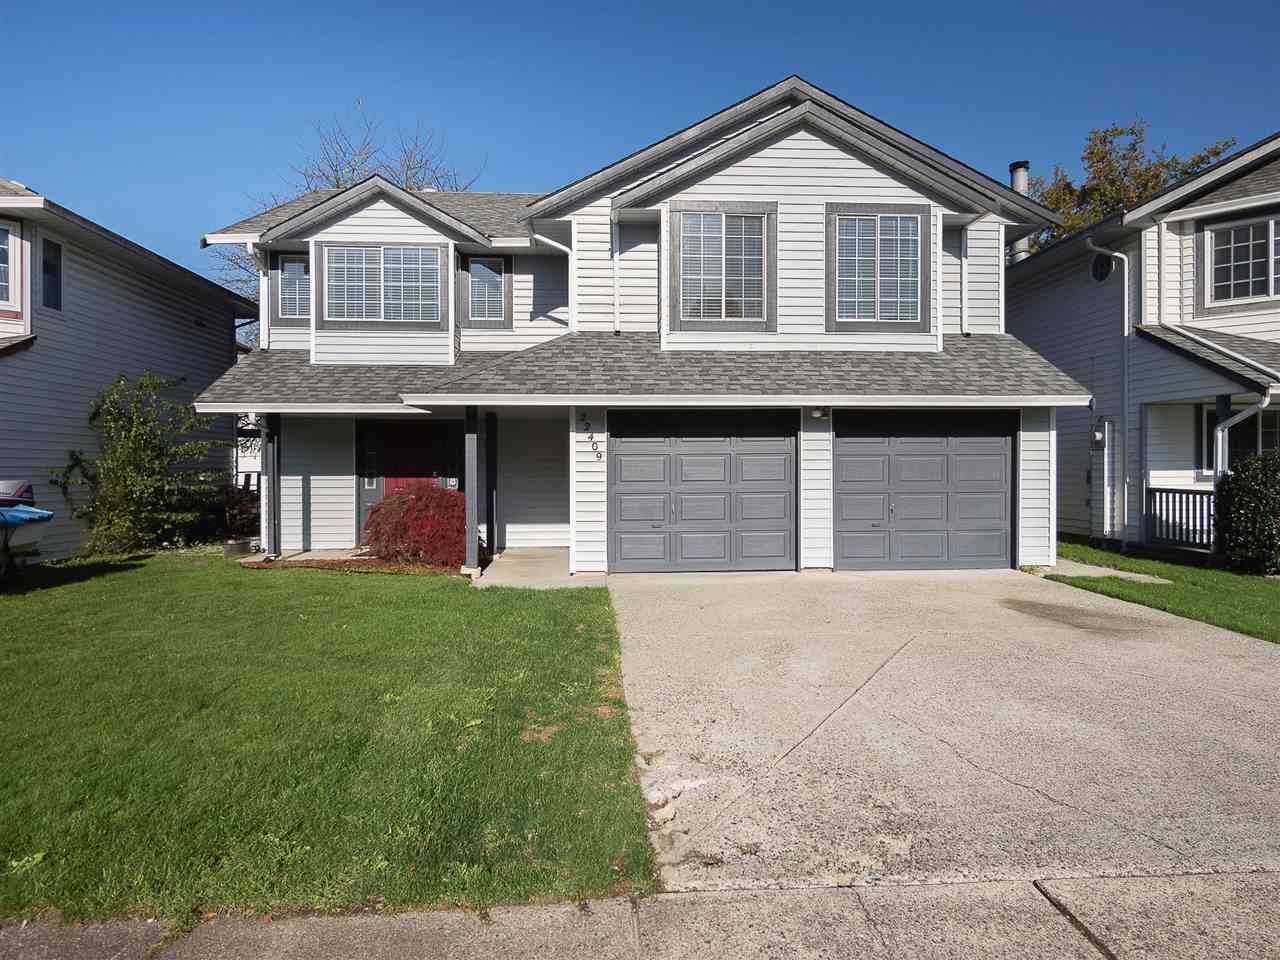 Main Photo: 22409 MORSE CRESCENT in Maple Ridge: East Central House for sale : MLS®# R2523993